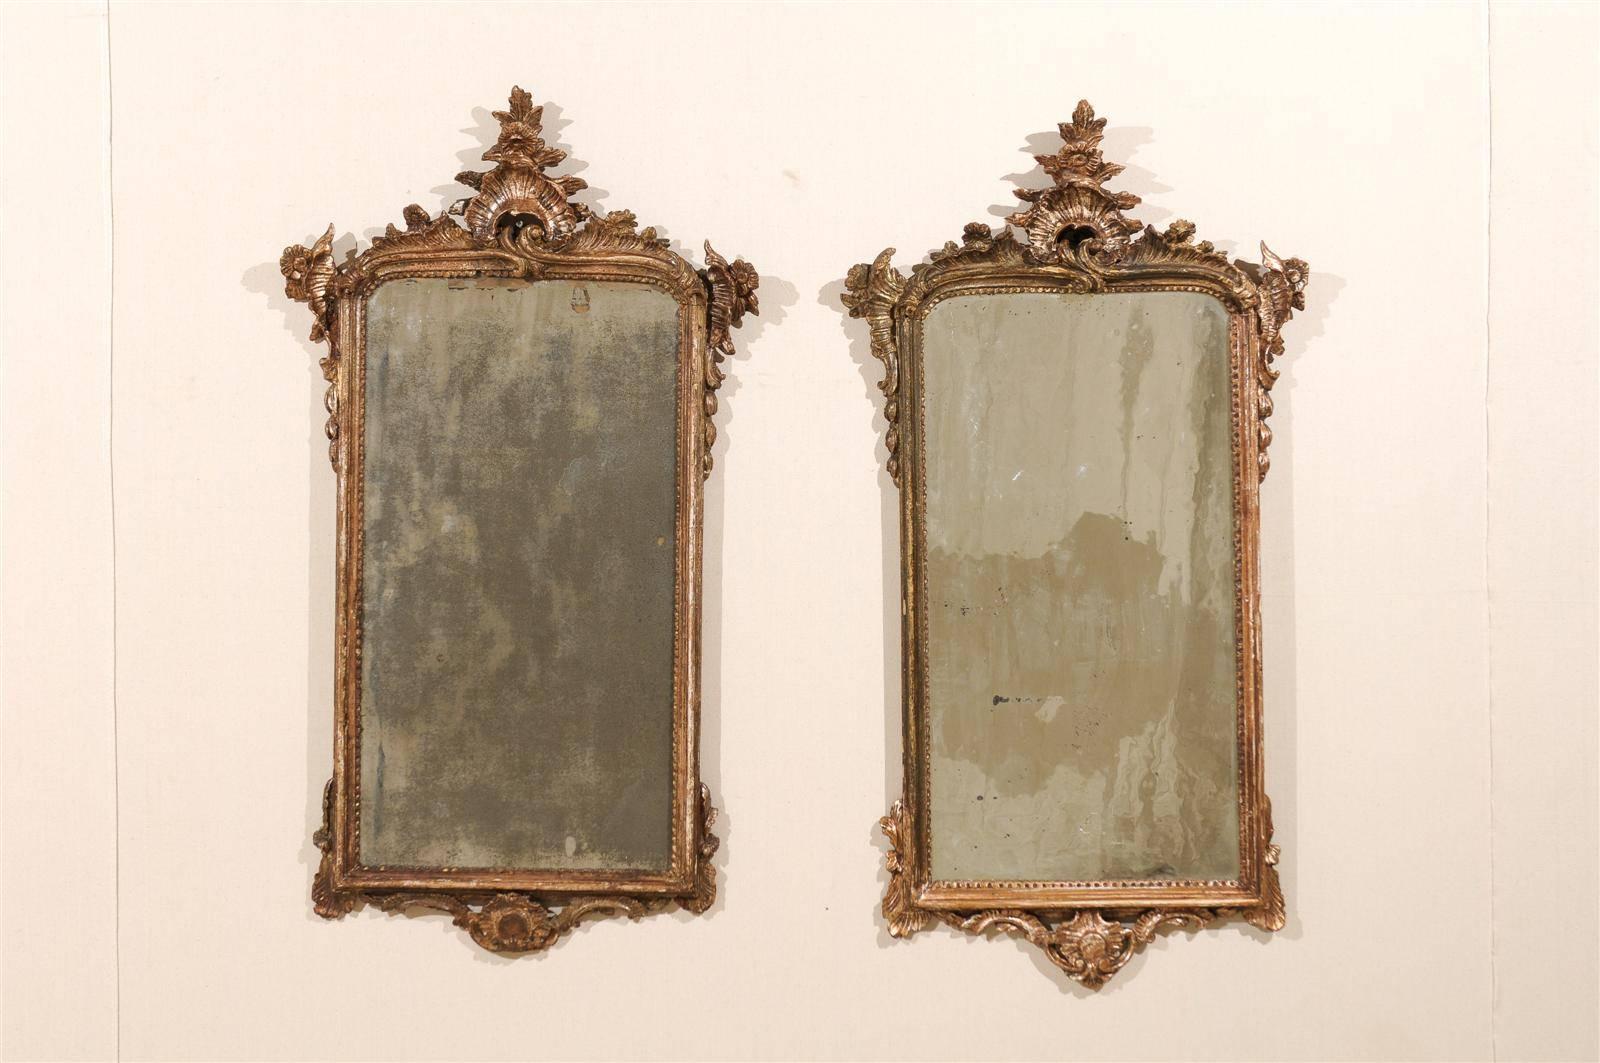 Carved Pair of 18th Century Italian Mirrors in Rococo Style with Nicely Aged Gold Color